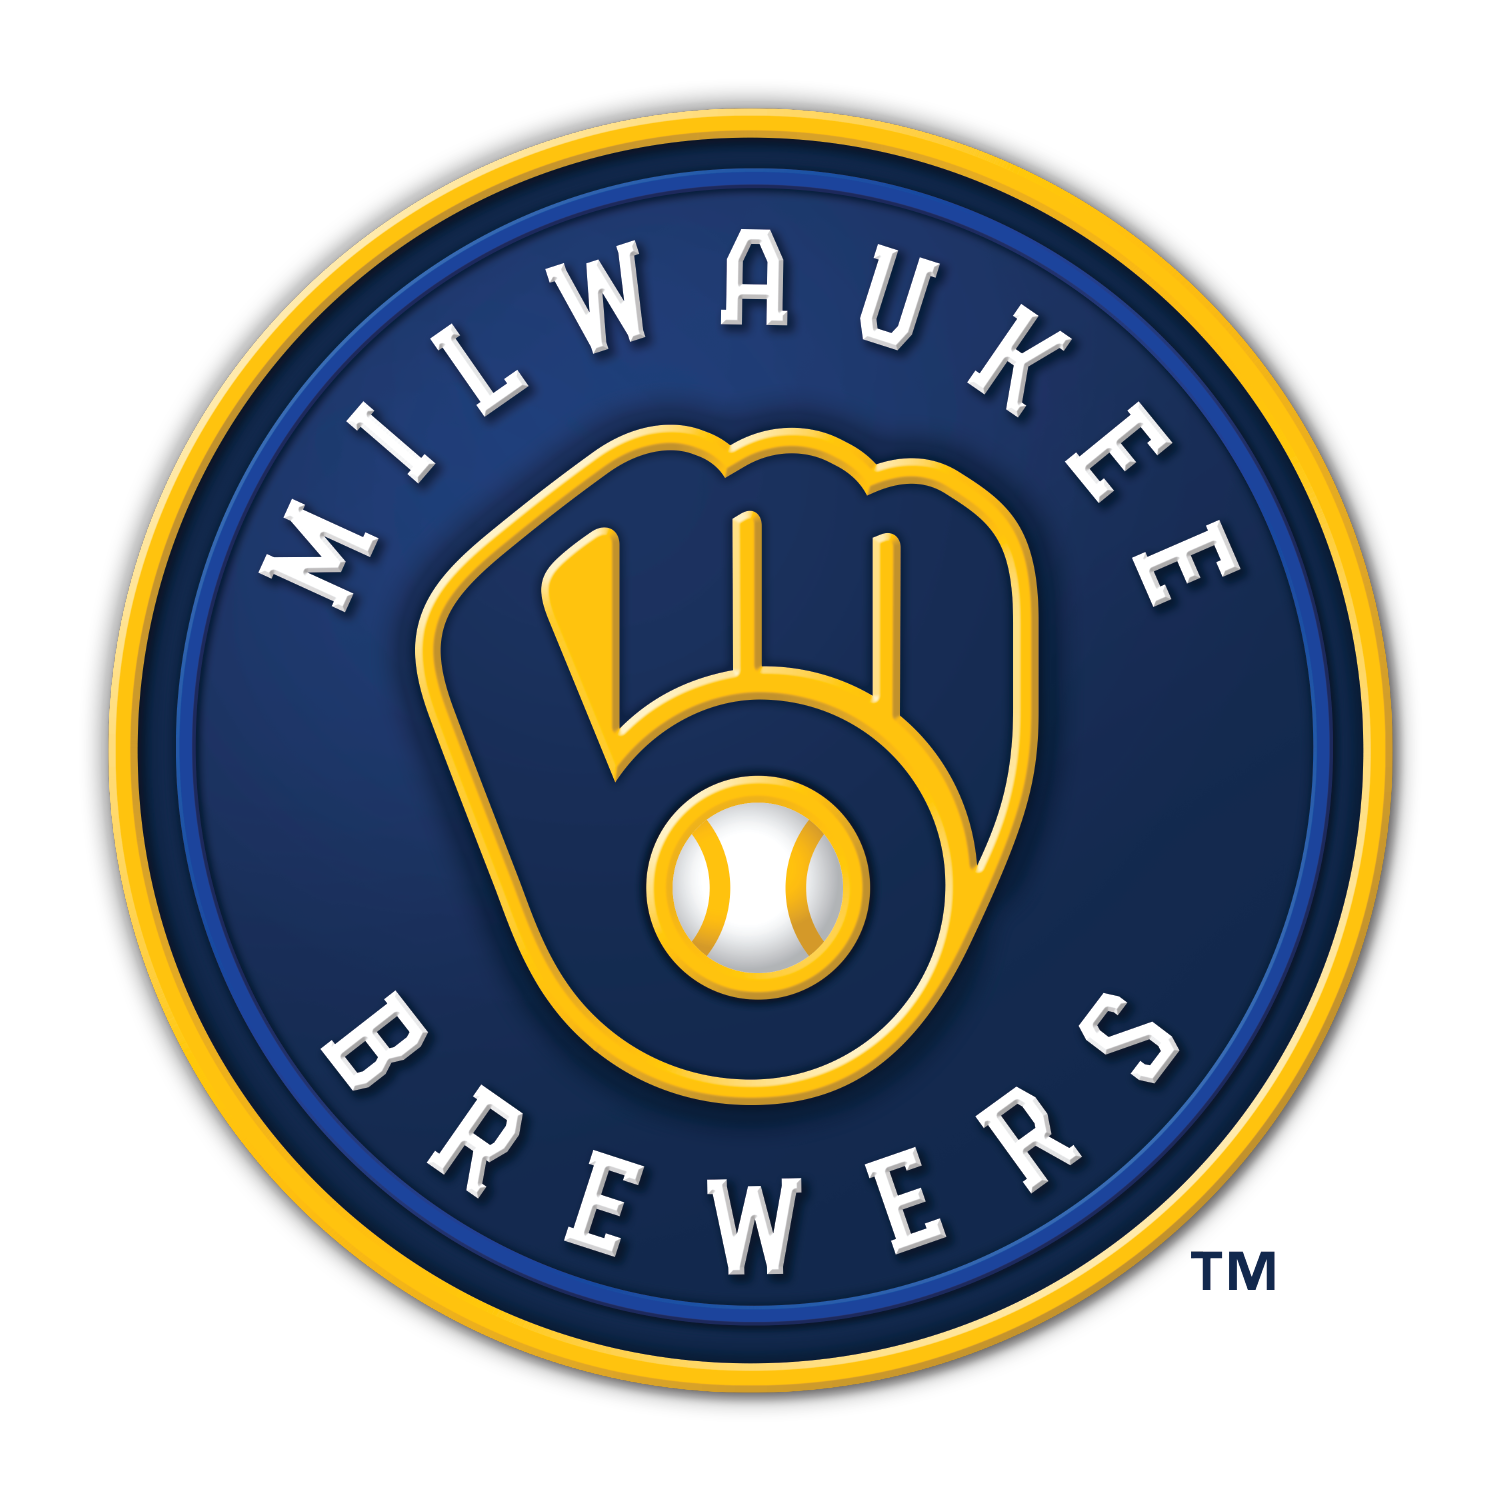 brewers new uniforms 2020